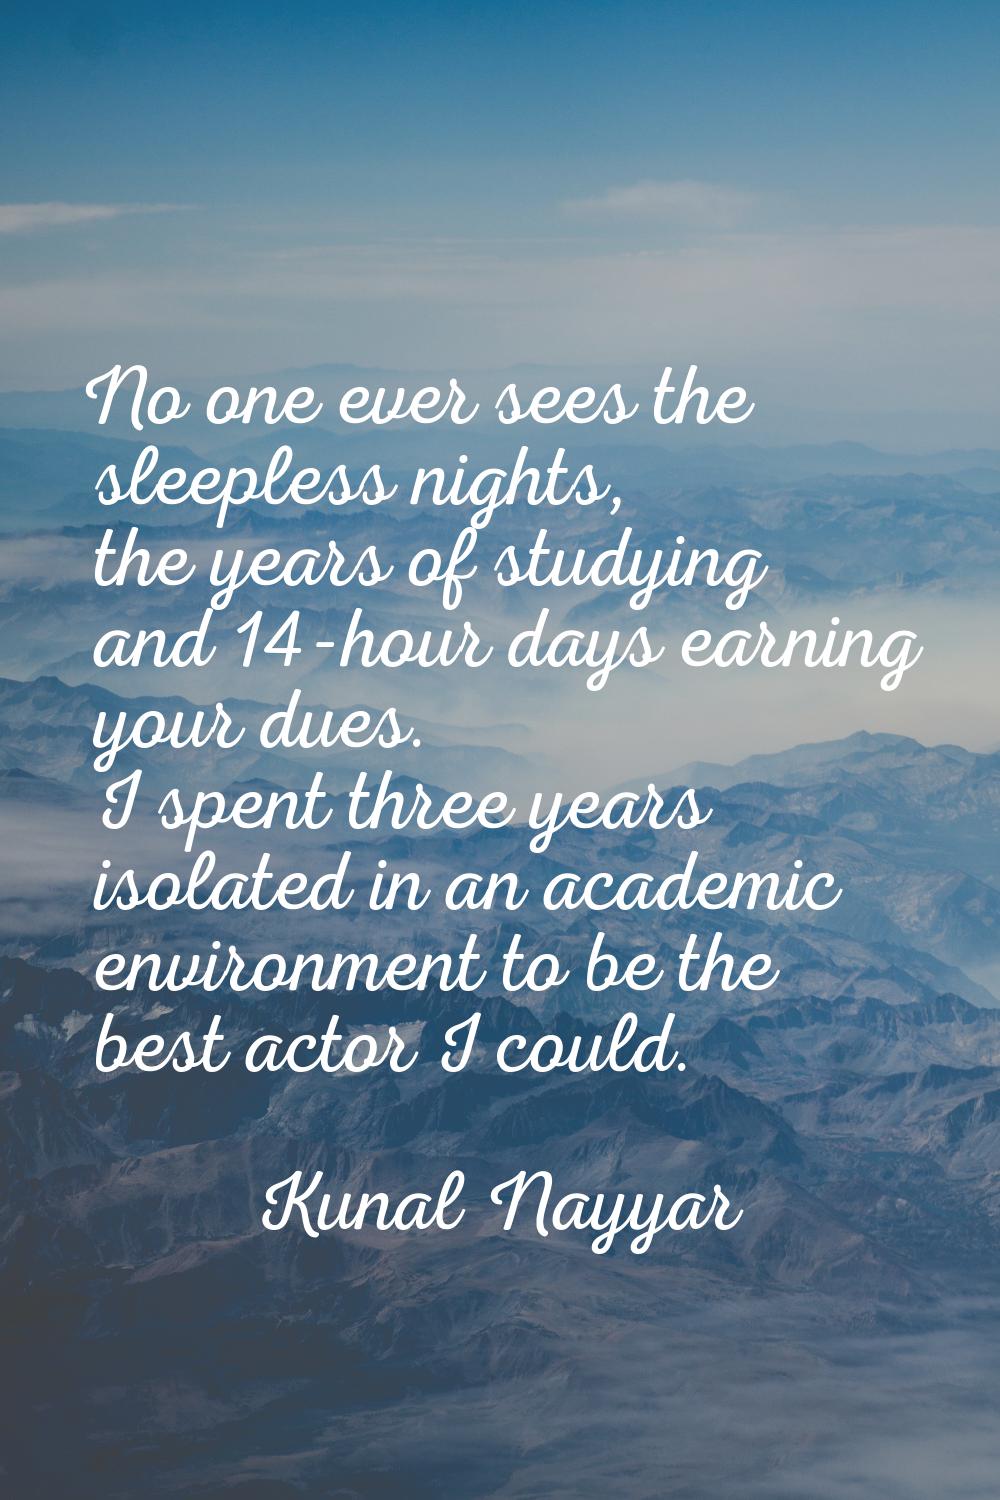 No one ever sees the sleepless nights, the years of studying and 14-hour days earning your dues. I 